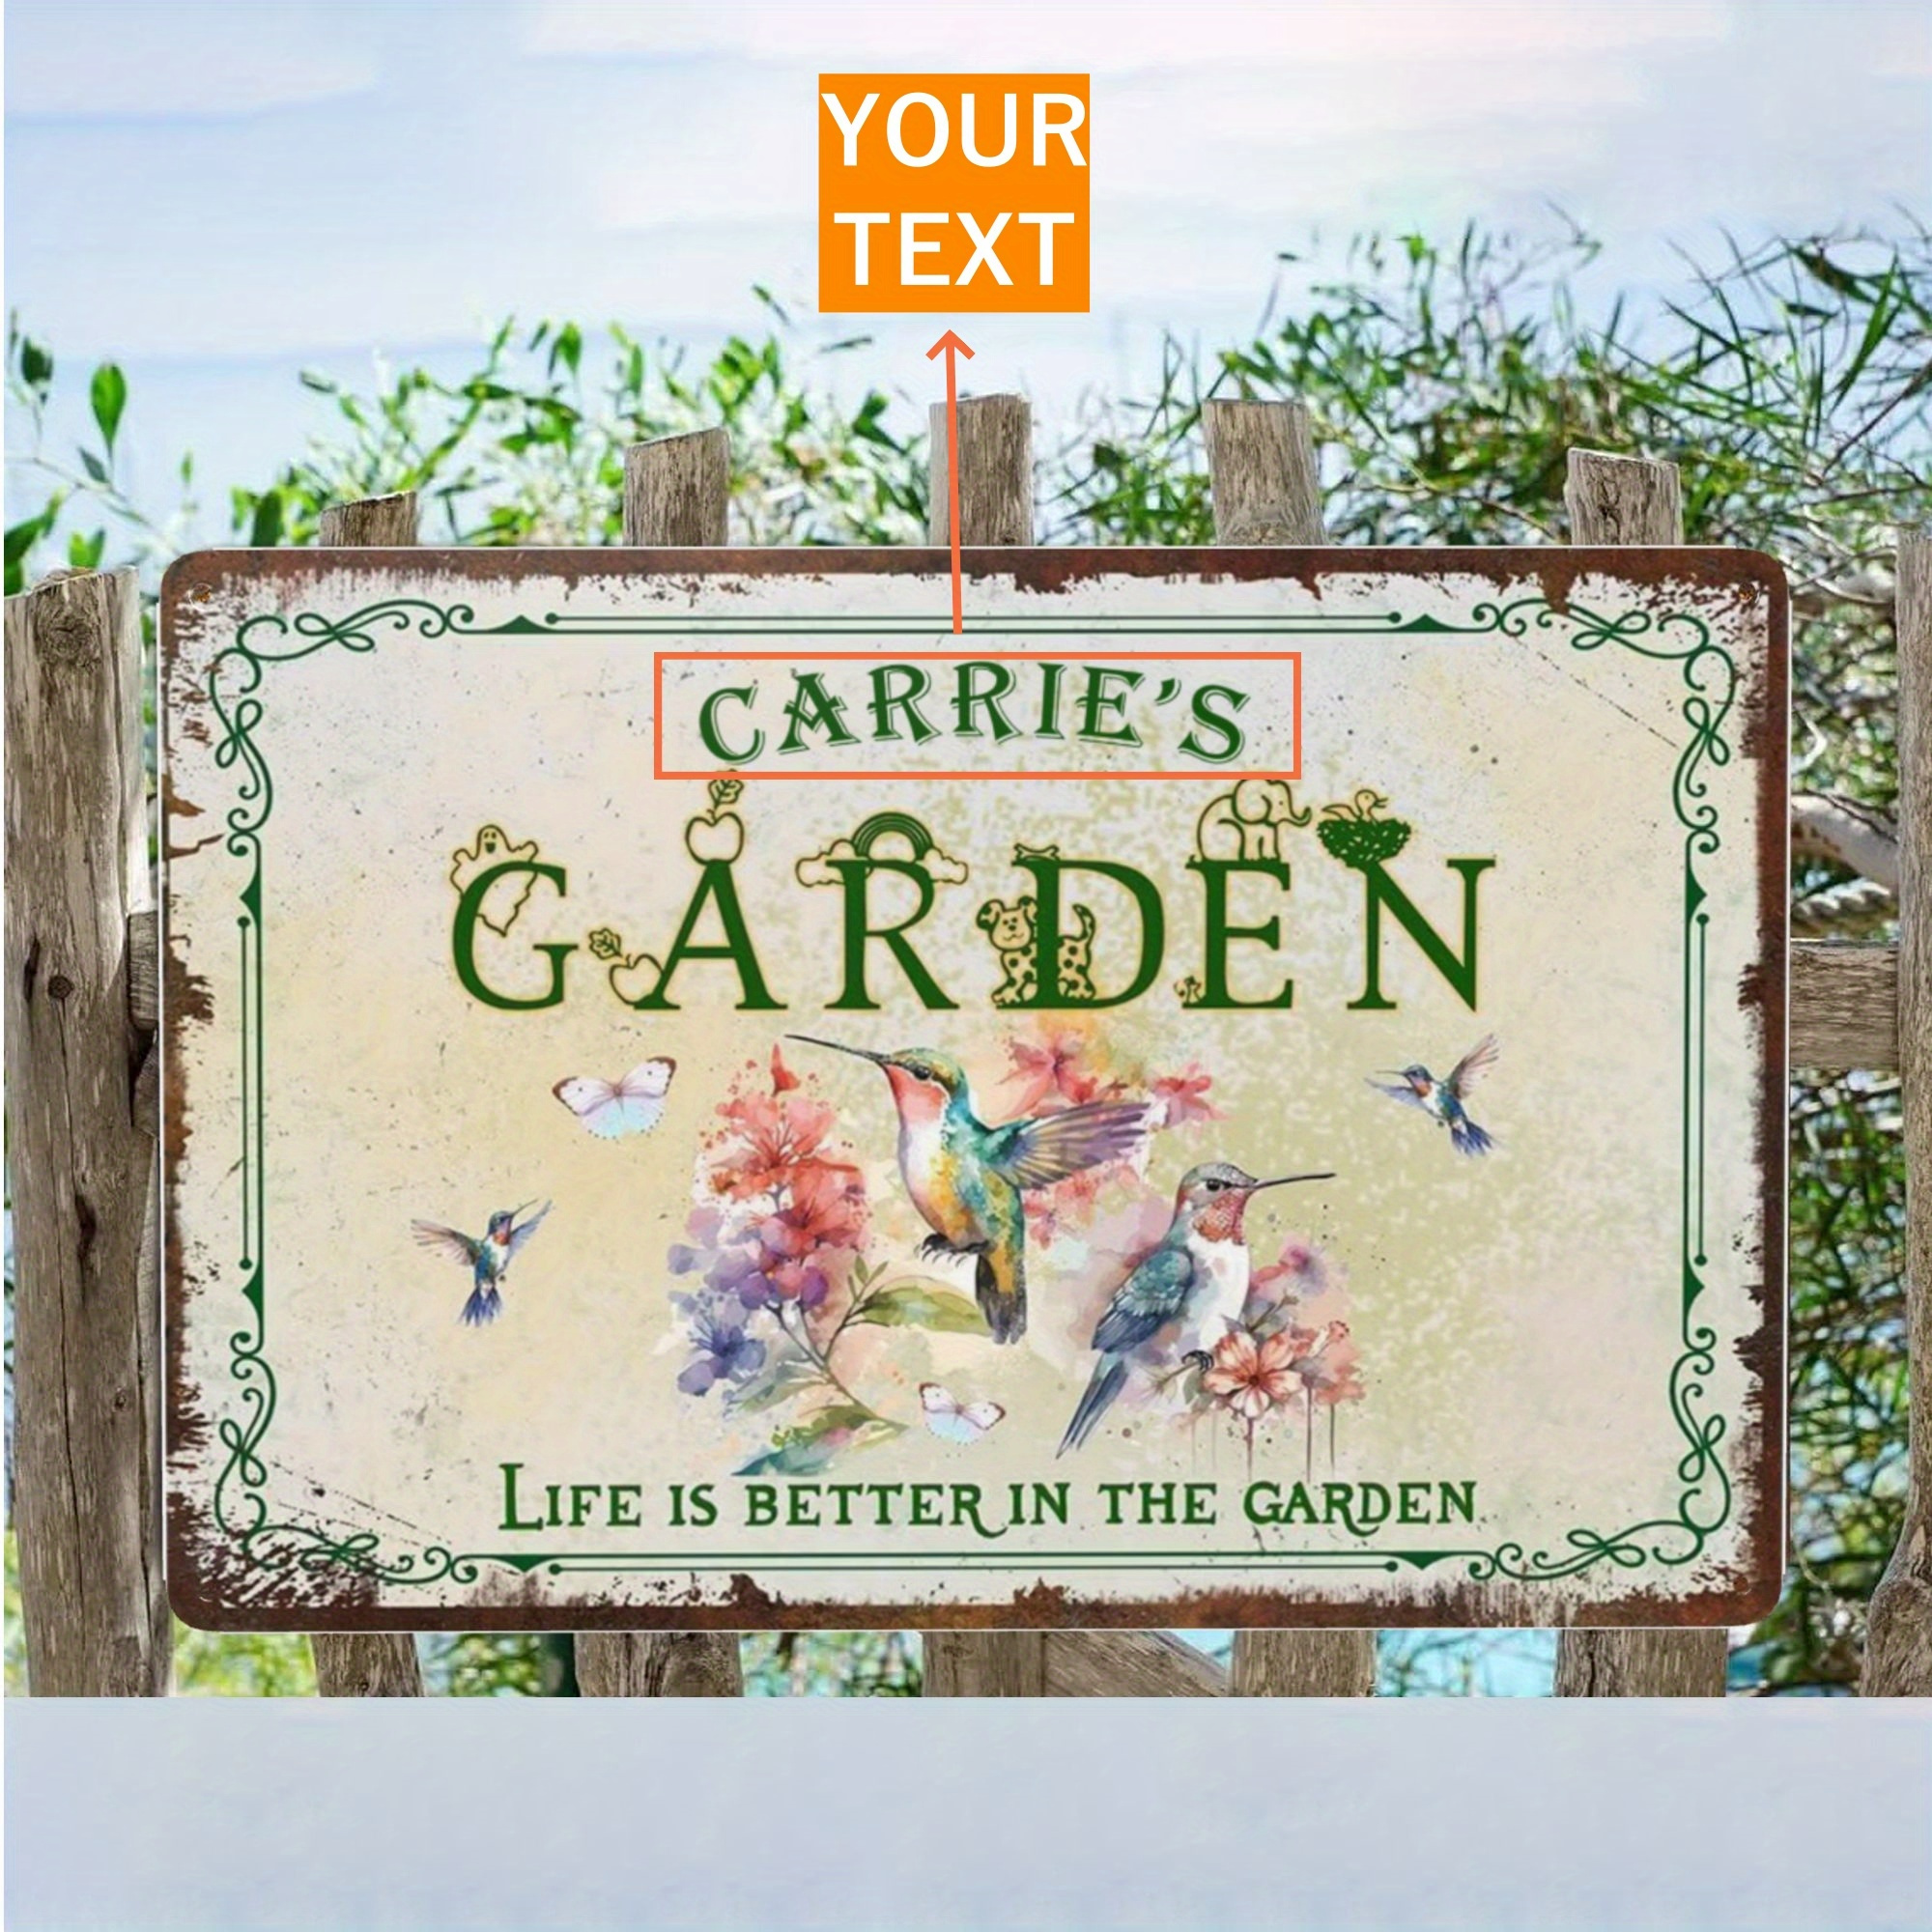 

Custom Vintage Garden Sign - Personalized Metal Wall Decor, Waterproof & Durable, Choose Your Design Theme, Easy Install, 12x8 Inches